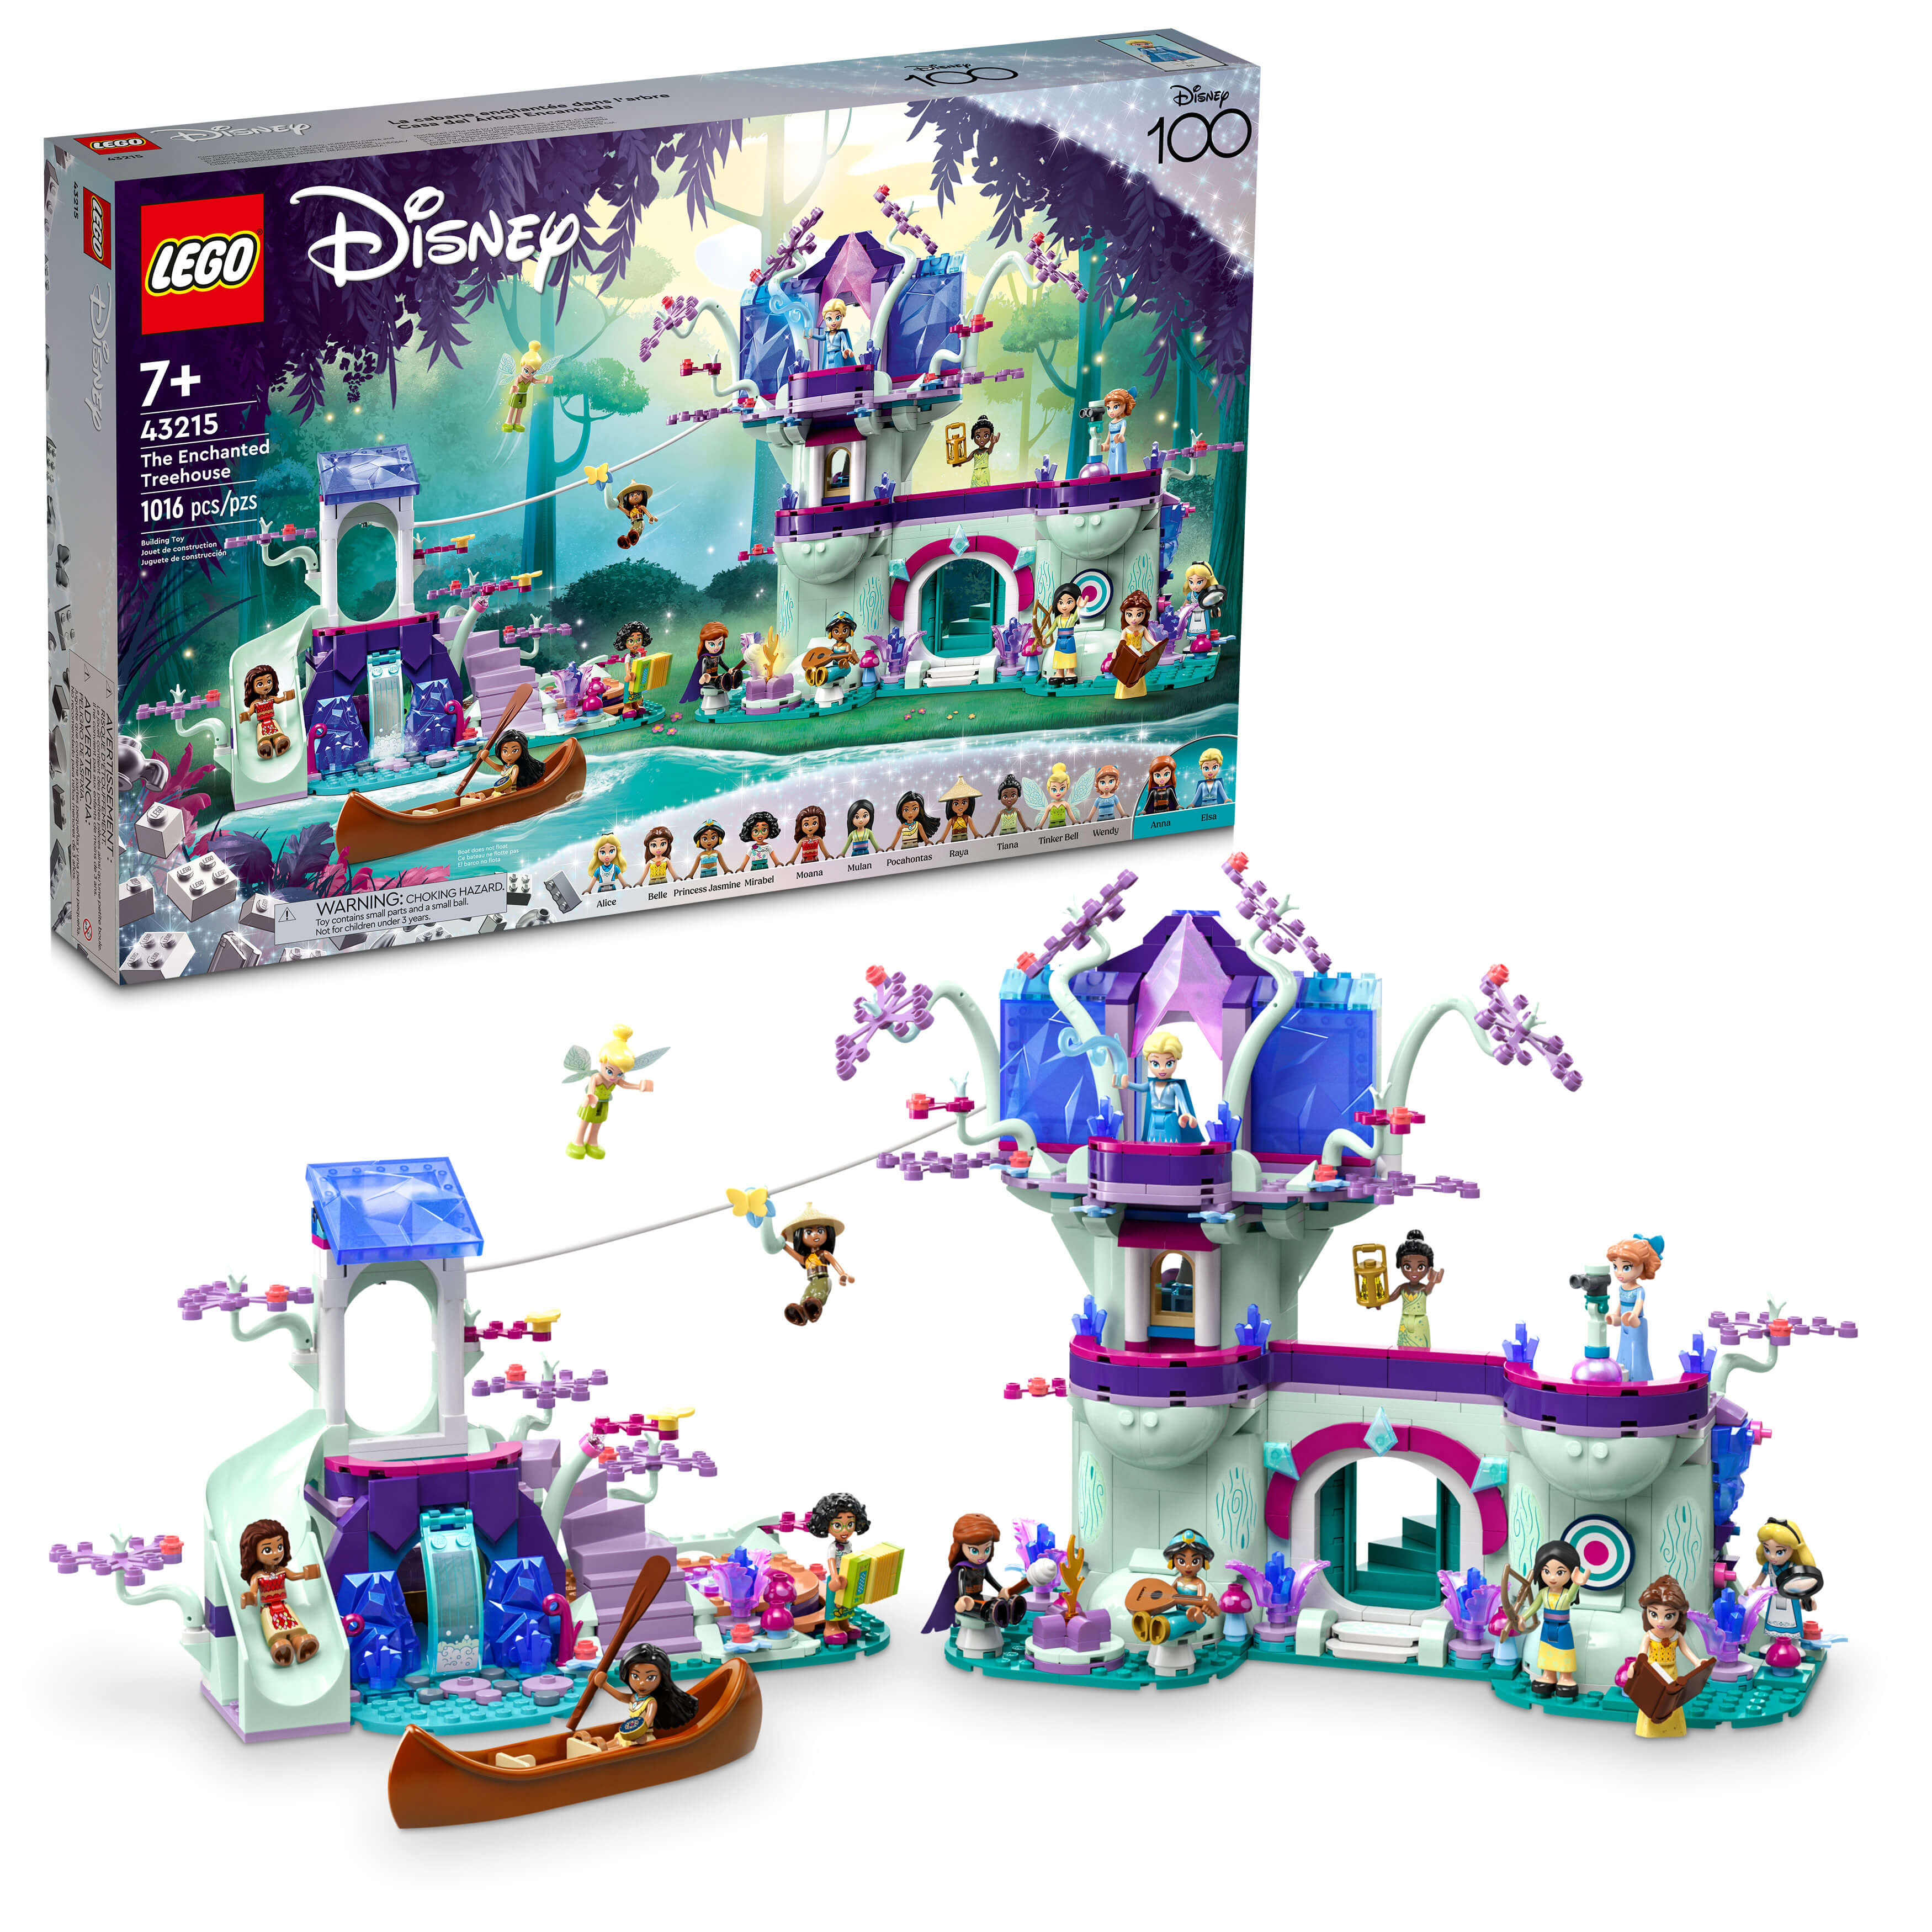 LEGO® Disney The Enchanted Treehouse 43215 Building Toy Set (1,016 Pieces)